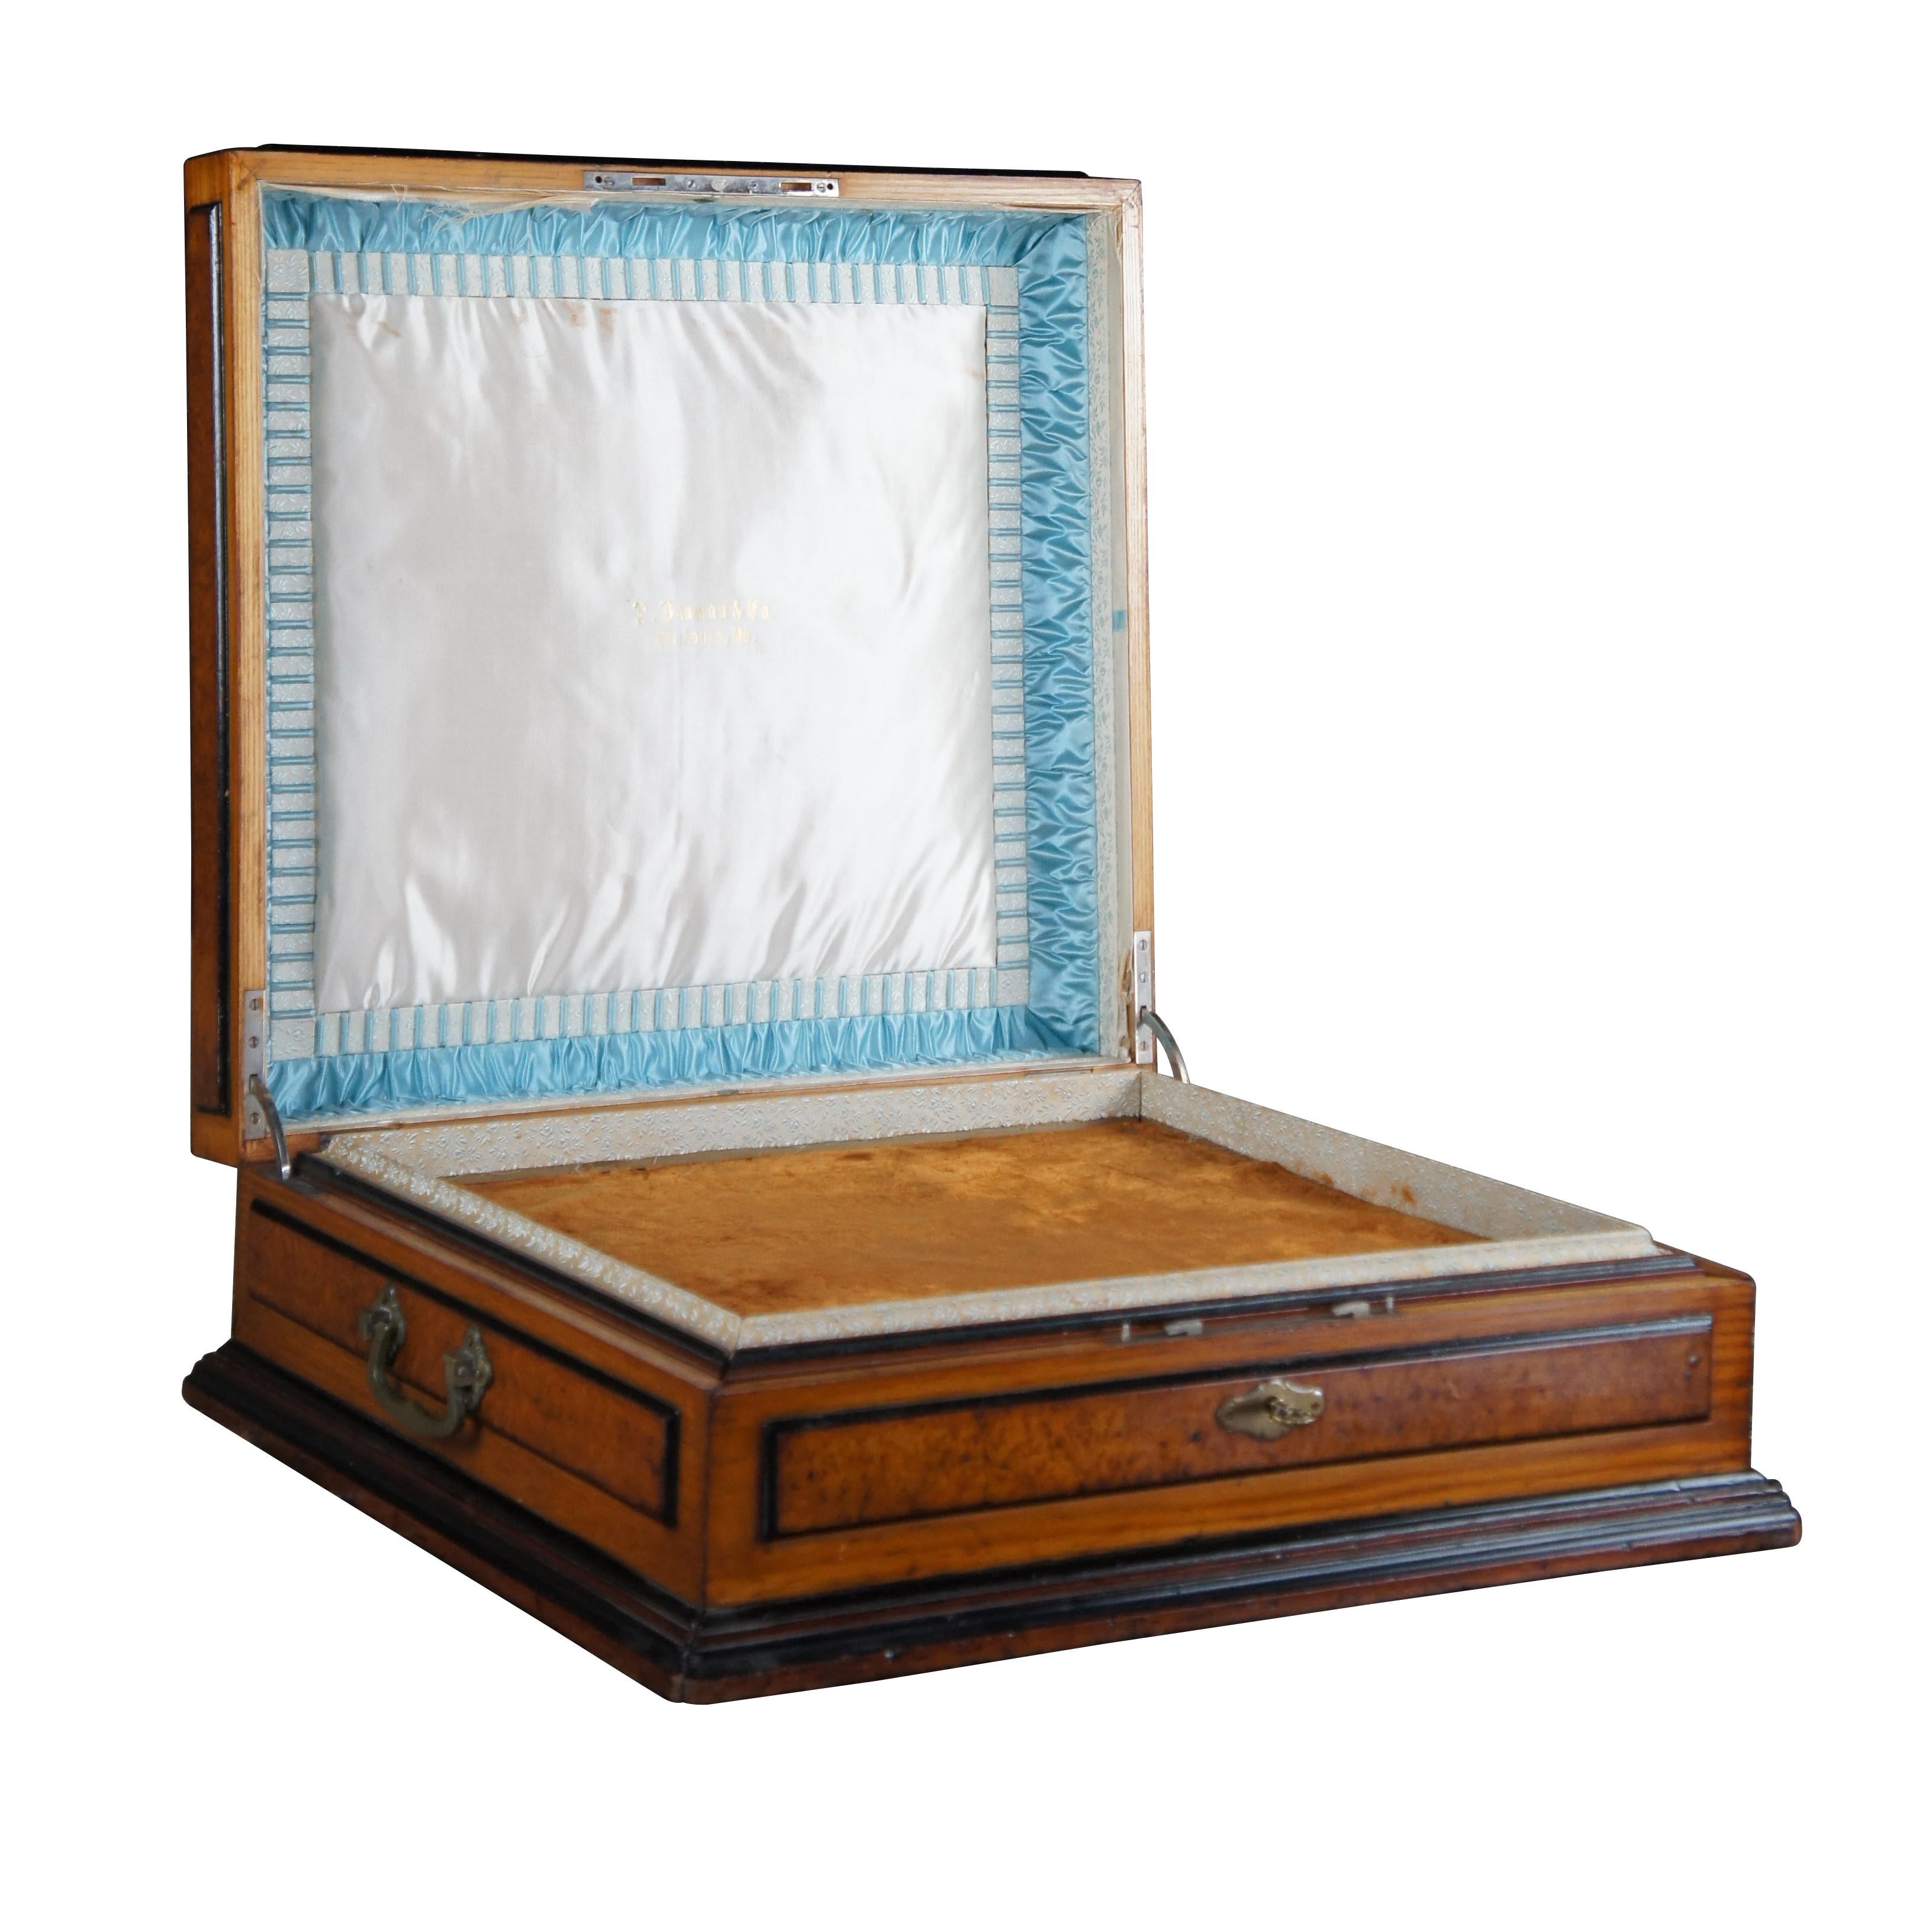 An exceptional large wooden case from the Victorian era, circa 1880s. Made from pine with raised and burled panels. Features a marquetry inlay top showcasing a bird within a flowering branch, framed in filigree inlay with a mother of pearl edge. The